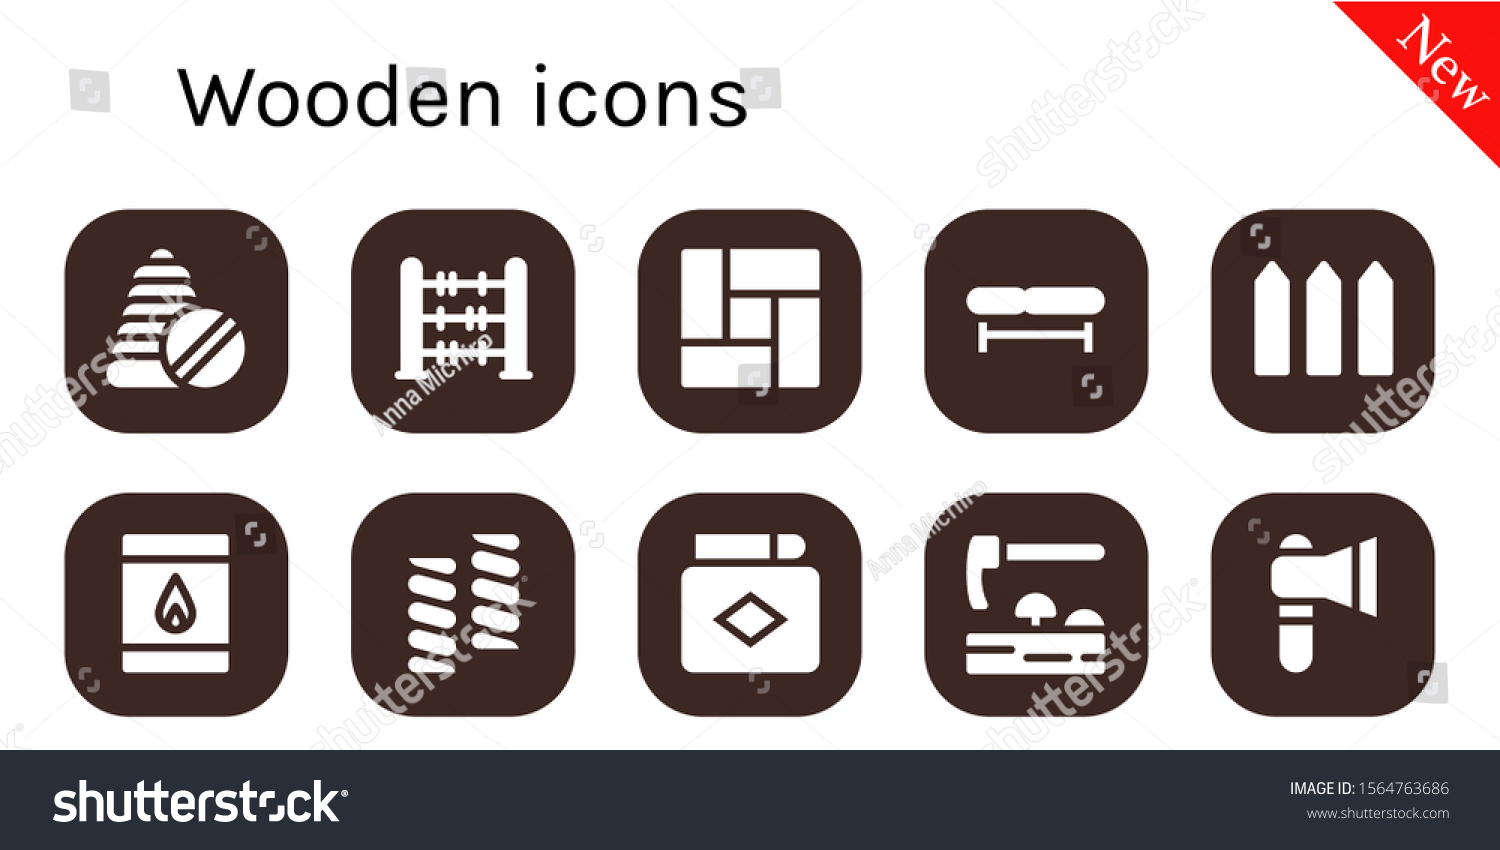 SVG of wooden icon set. 10 filled wooden icons.  Simple modern icons about  - Toys, Abacus, Floor, Bench, Fence, Matchbox, Marshmallow, Match, Adze, Axe svg